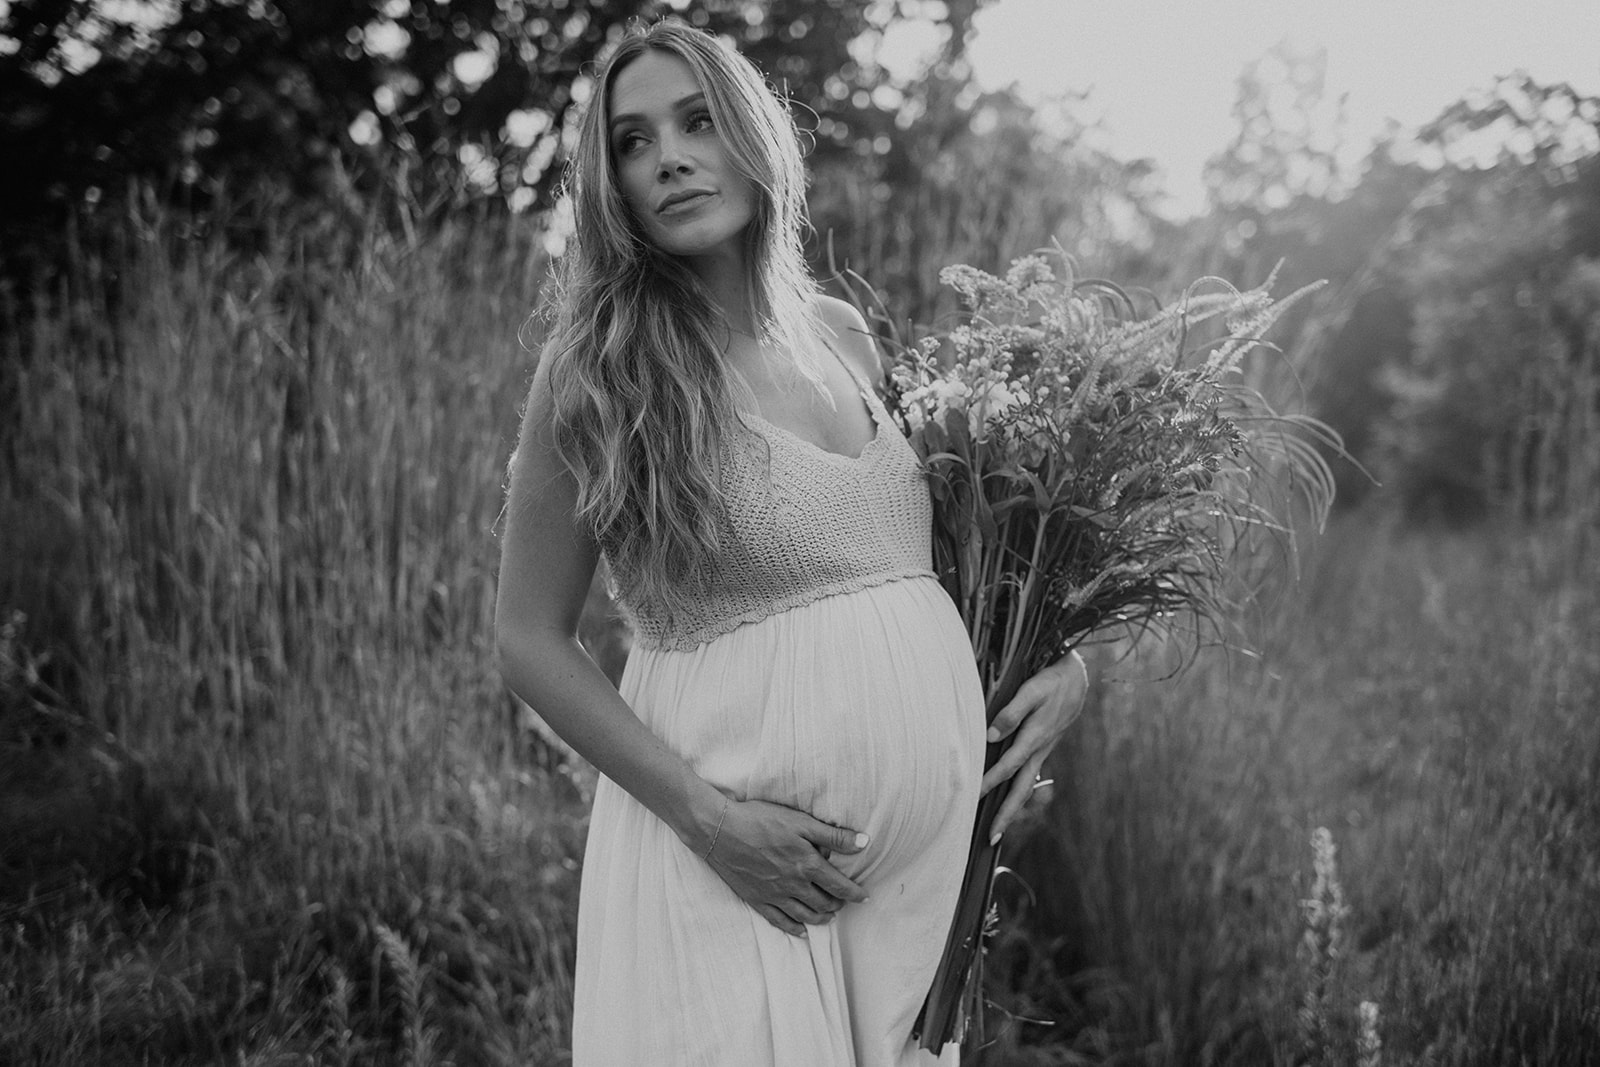 Black and white maternity portrait capturing an expecting mother in a white dress